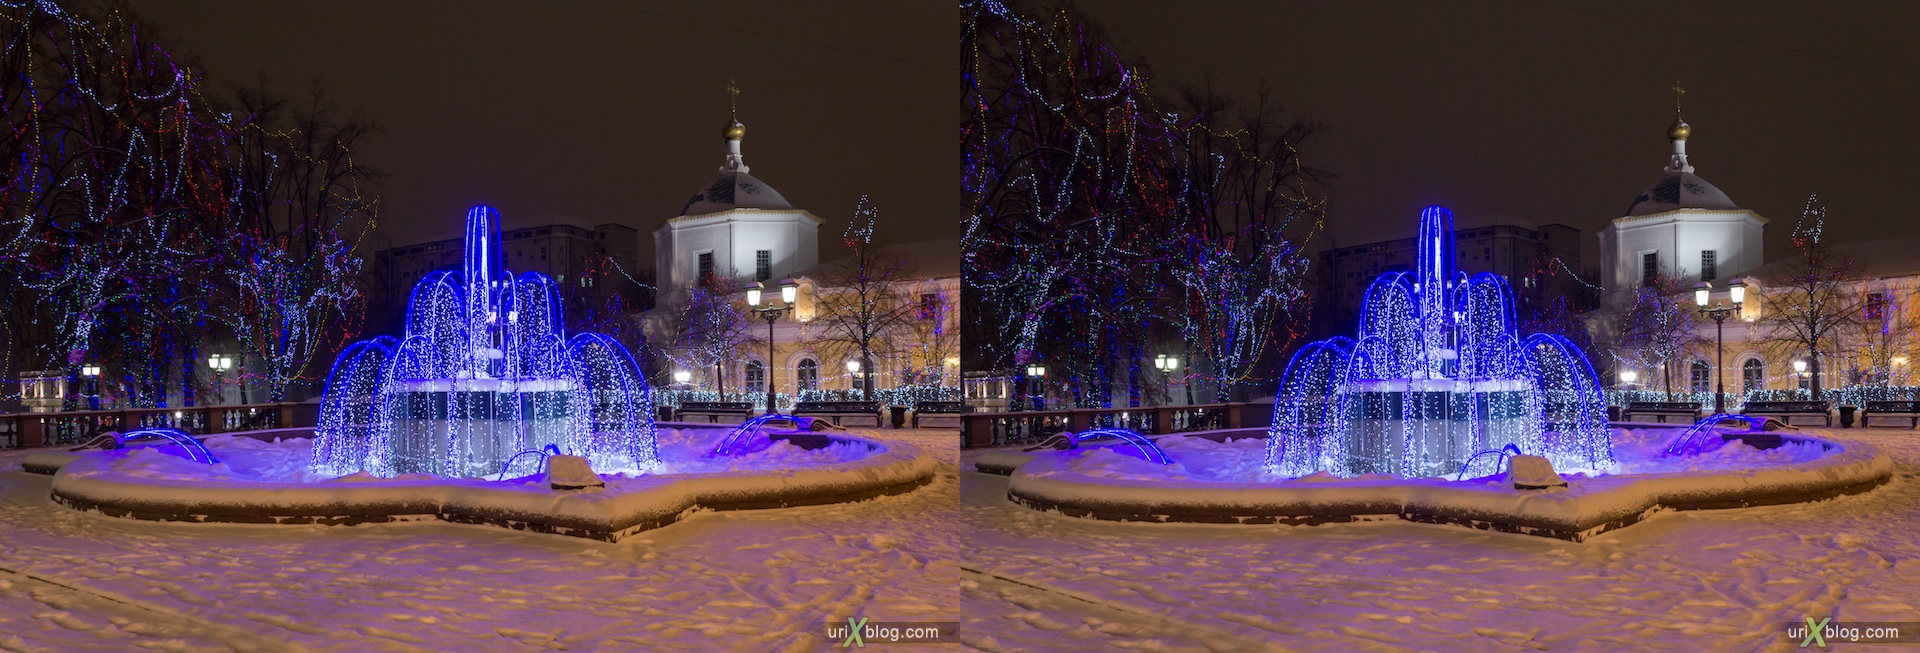 2013, Moscow, Tverskaja square, night, fountain, snow, winter, new year, christmass tree, city, Russia, 3D, stereo pair, cross-eyed, crossview, cross view stereo pair